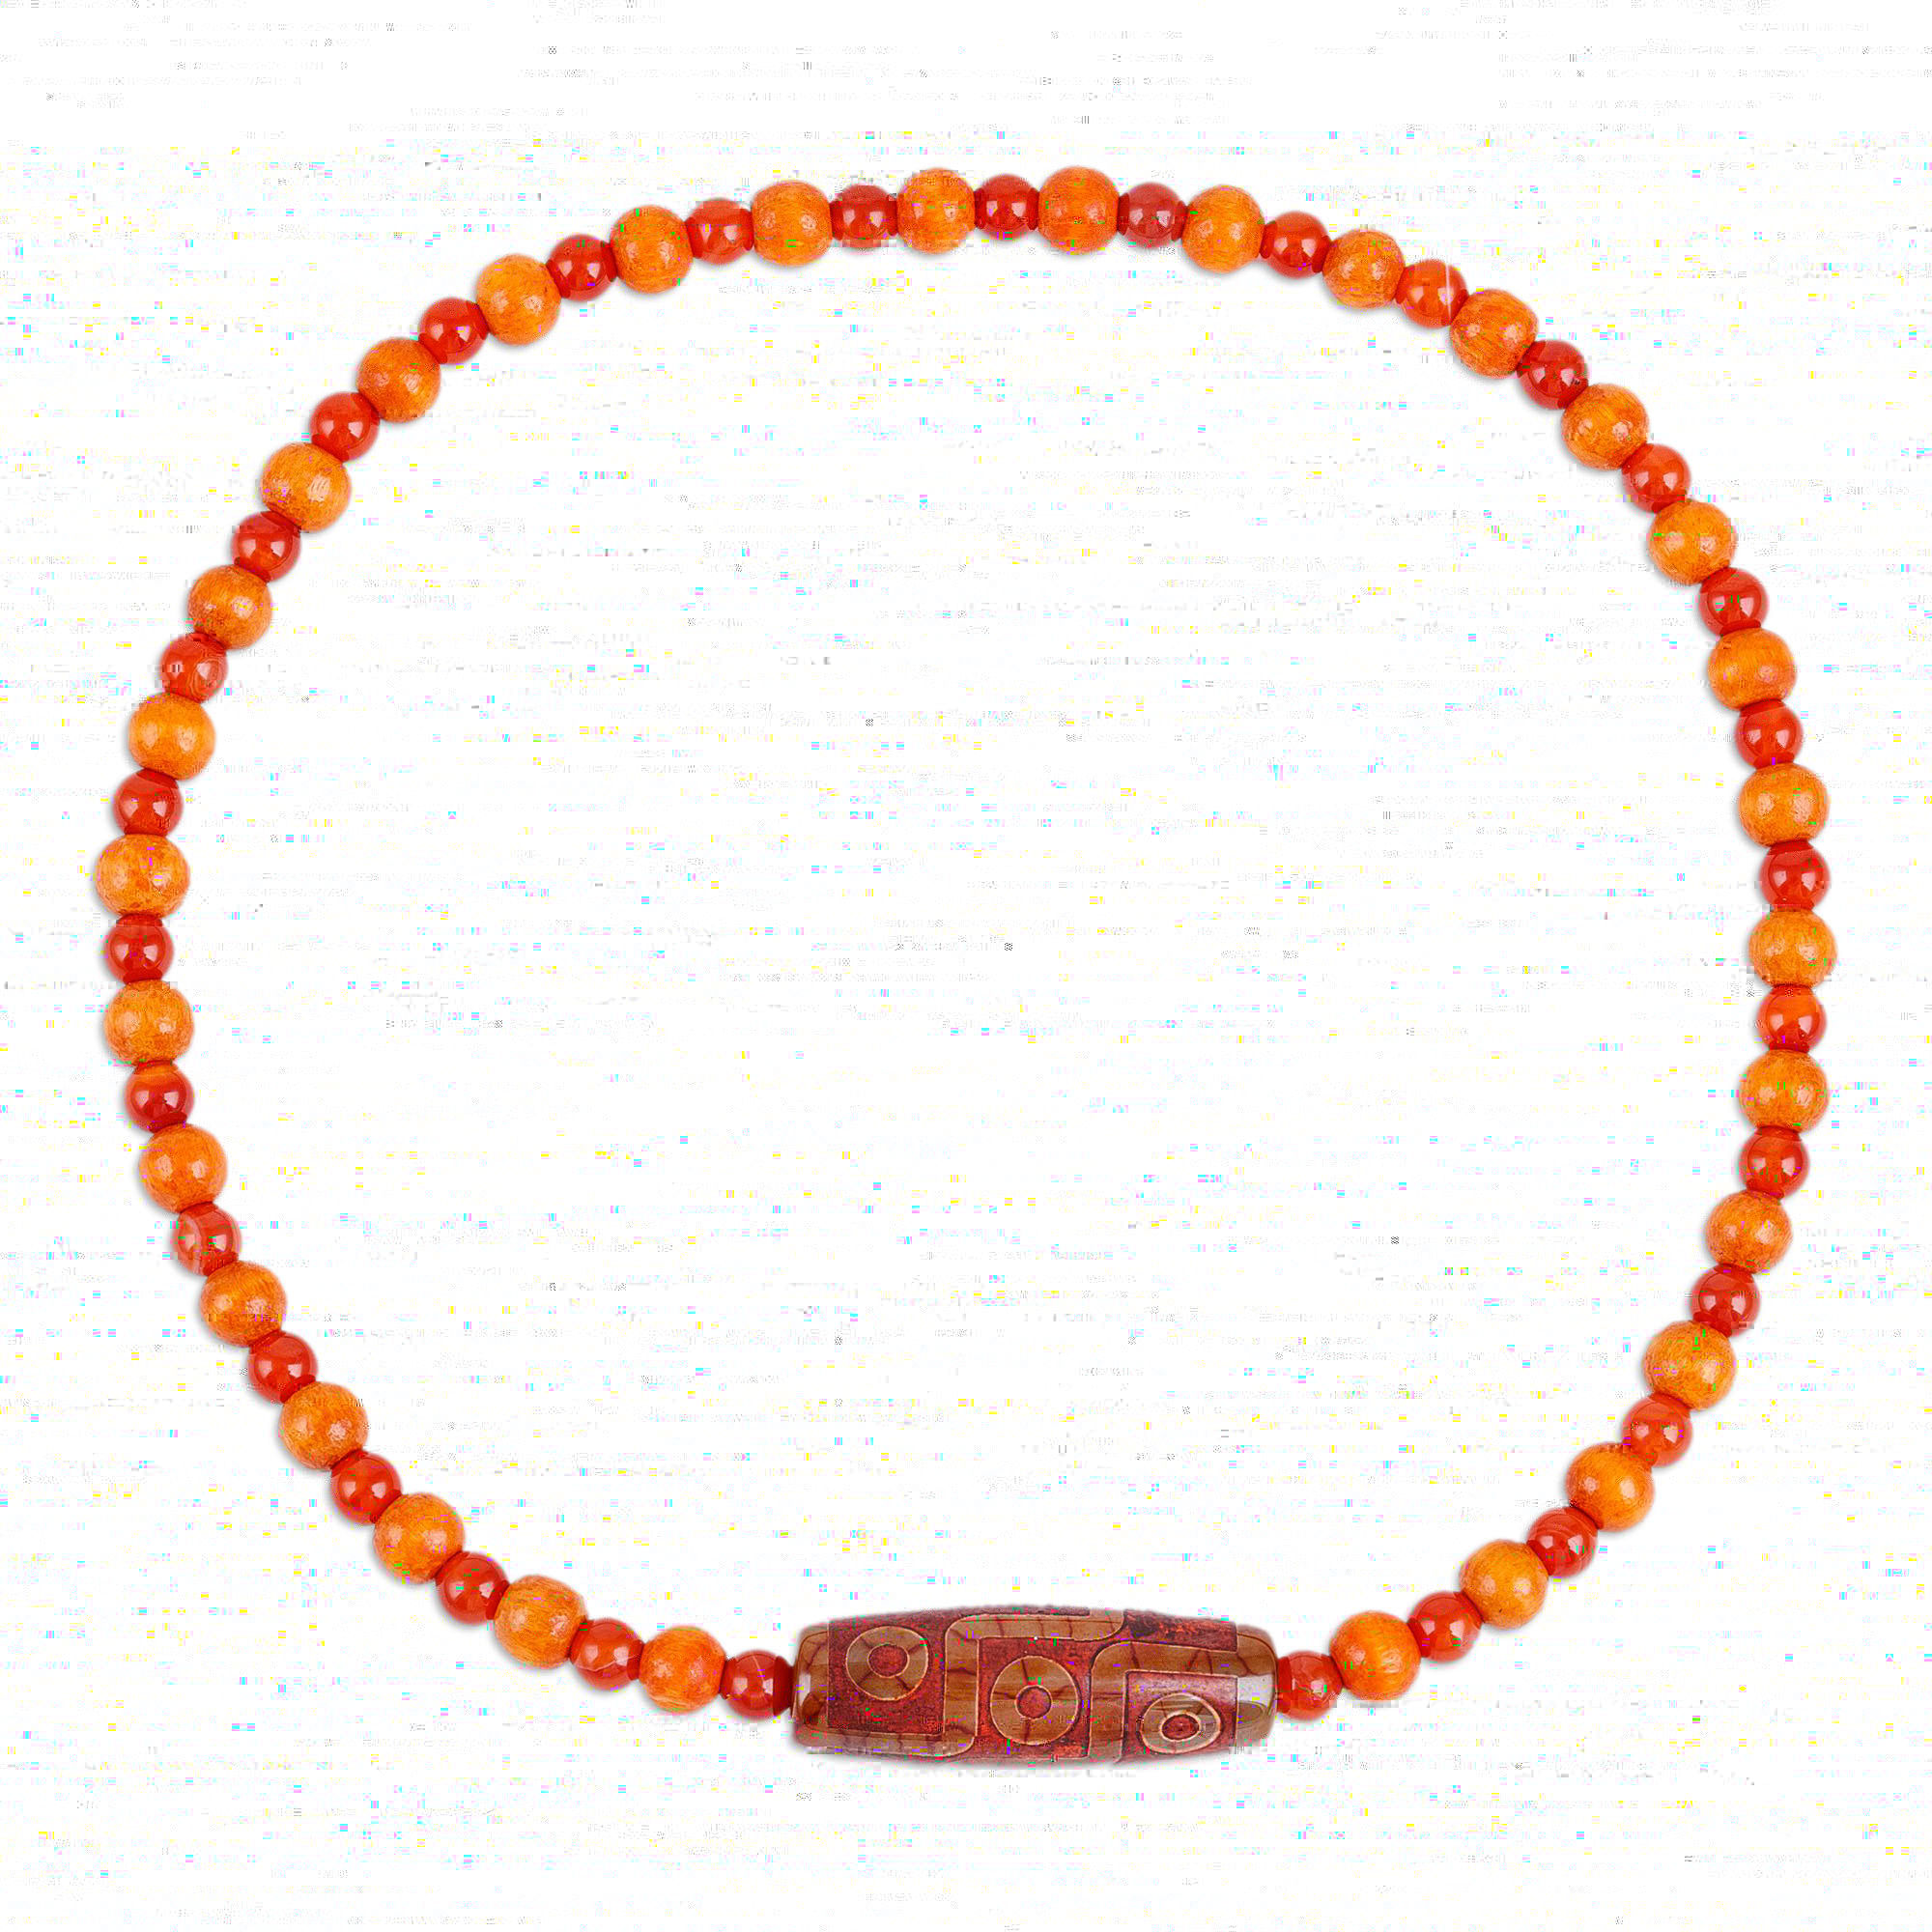 Agate and carnelian beaded choker, 'Chic Eyed Dzi' - Handmade Agate Carnelian Wood Beaded Dzi Choker Necklace